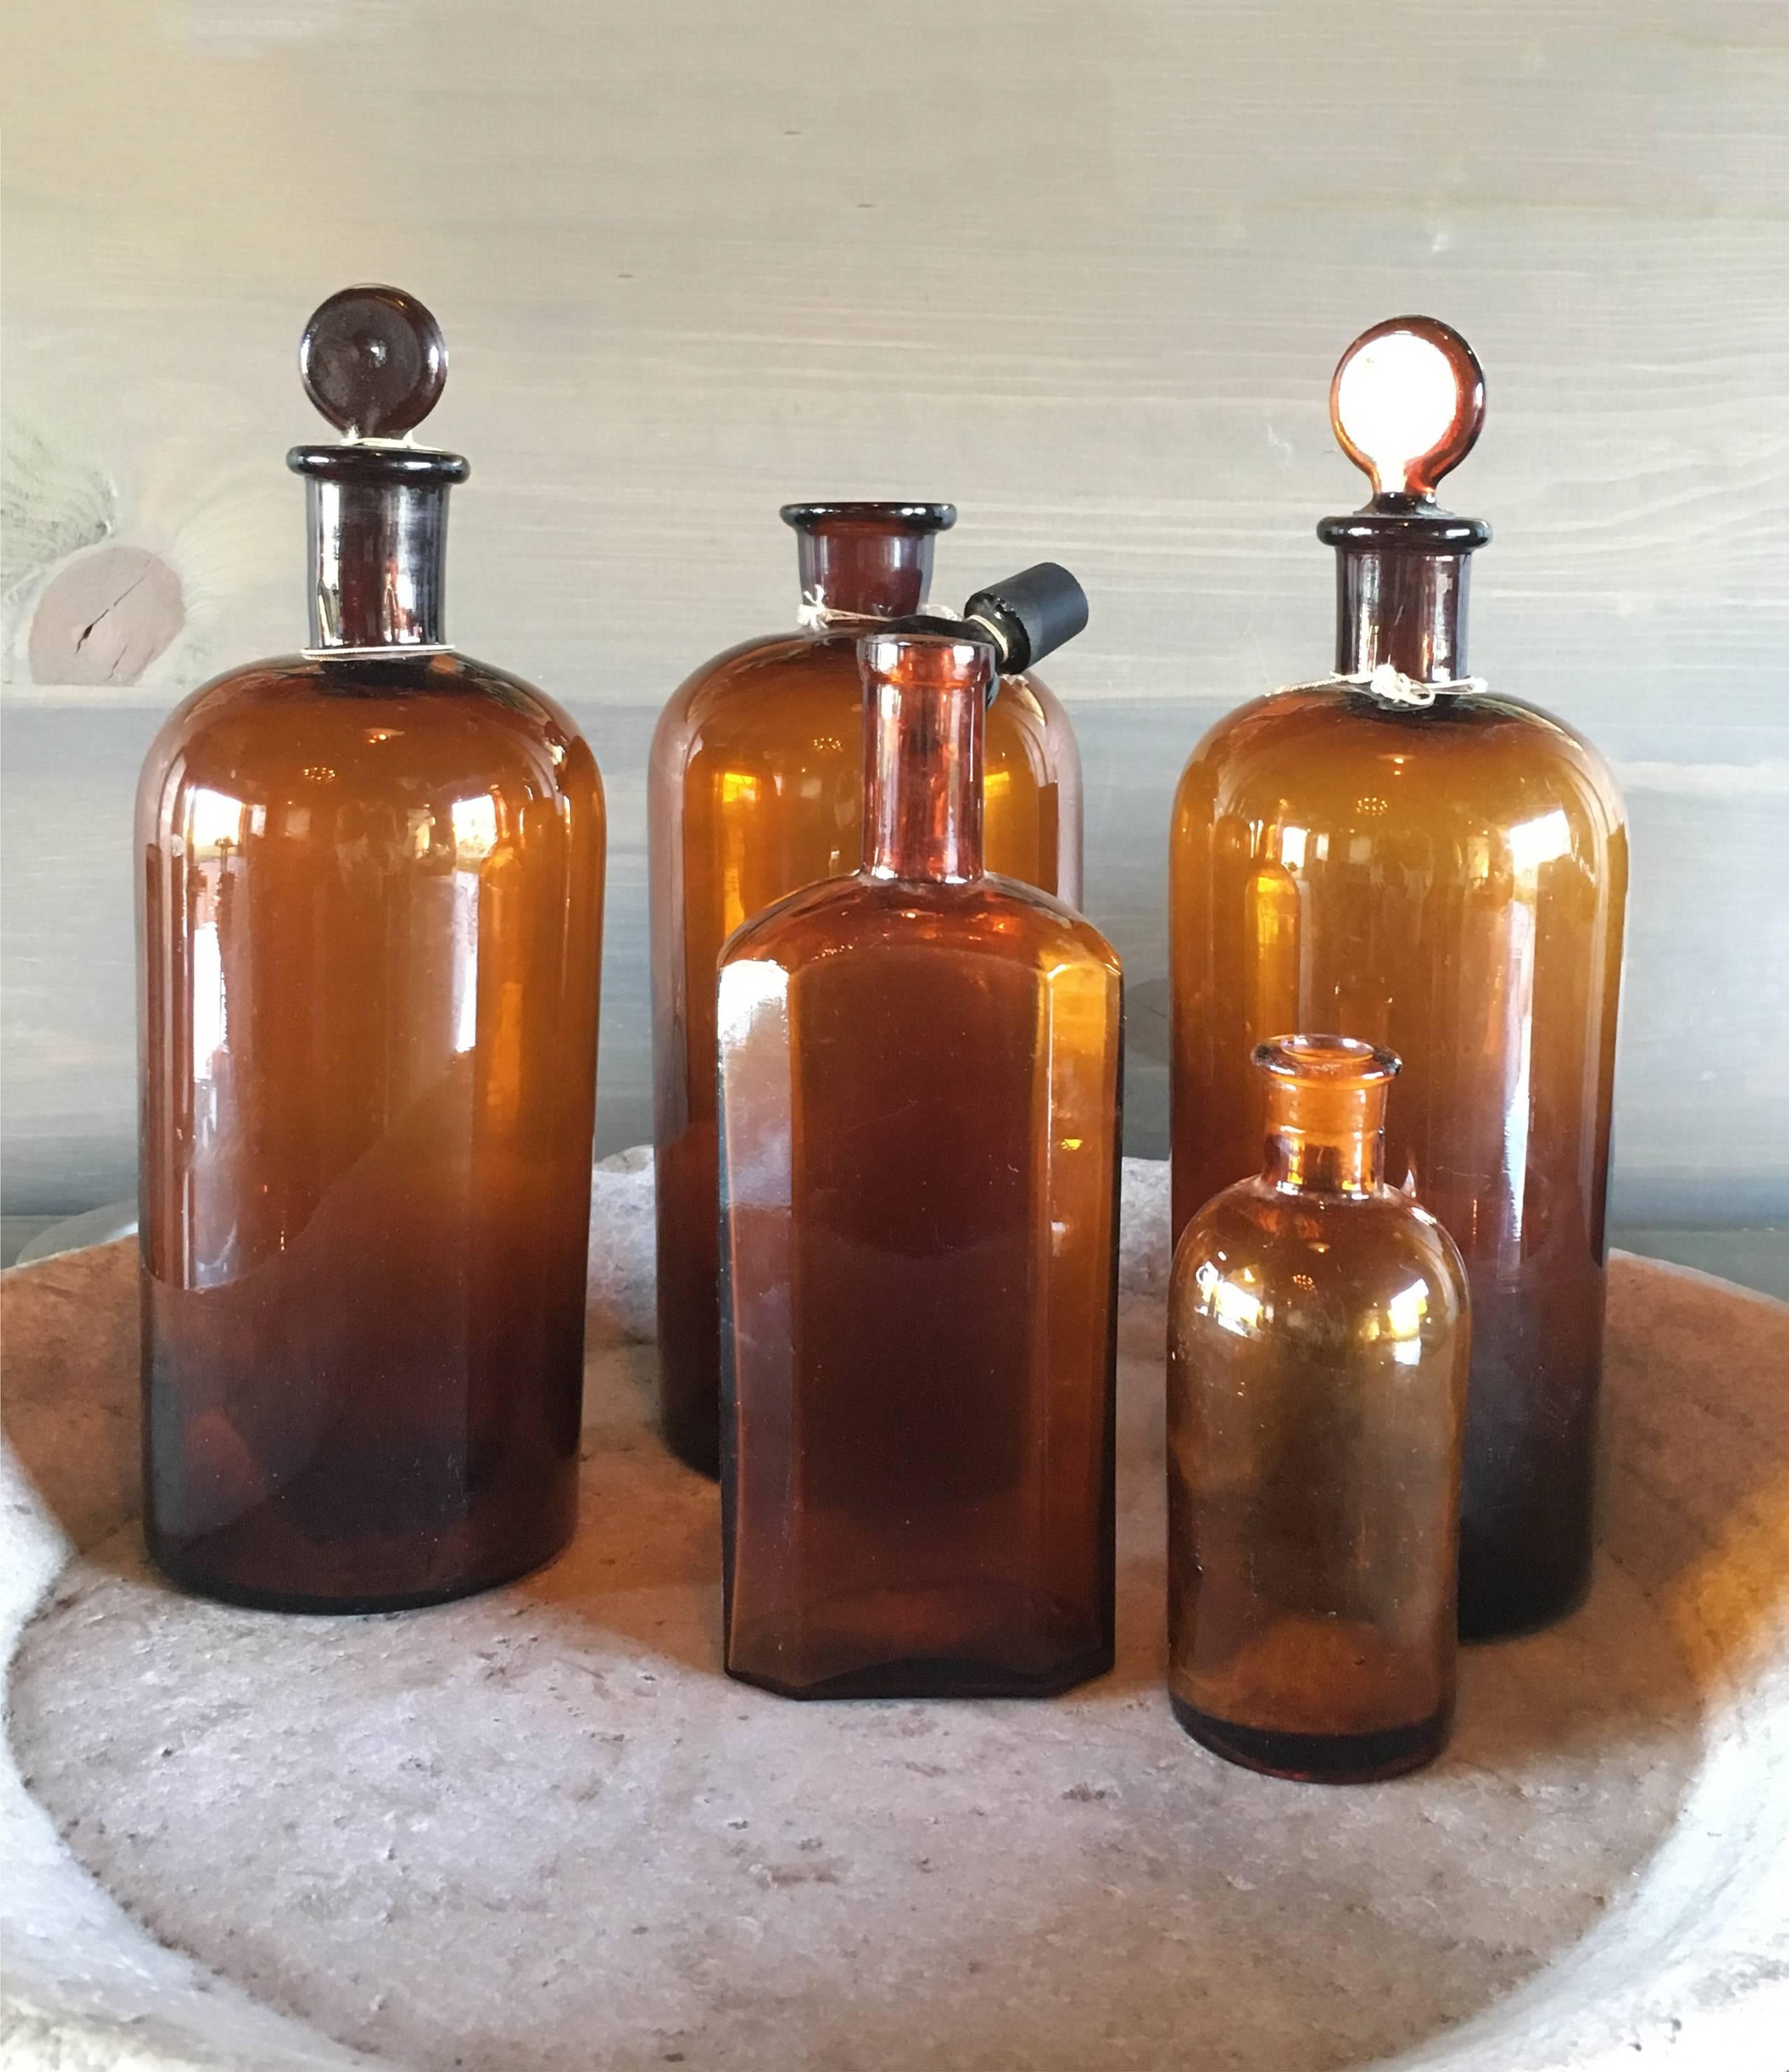 Set of five amber glass vintage apothecary bottles, France, circa 19th century. 

Three large bottles with stoppers, a medium-sized rectangular bottle, and one small cylindrical smaller bottle. 

Originally for storage of medicinal or